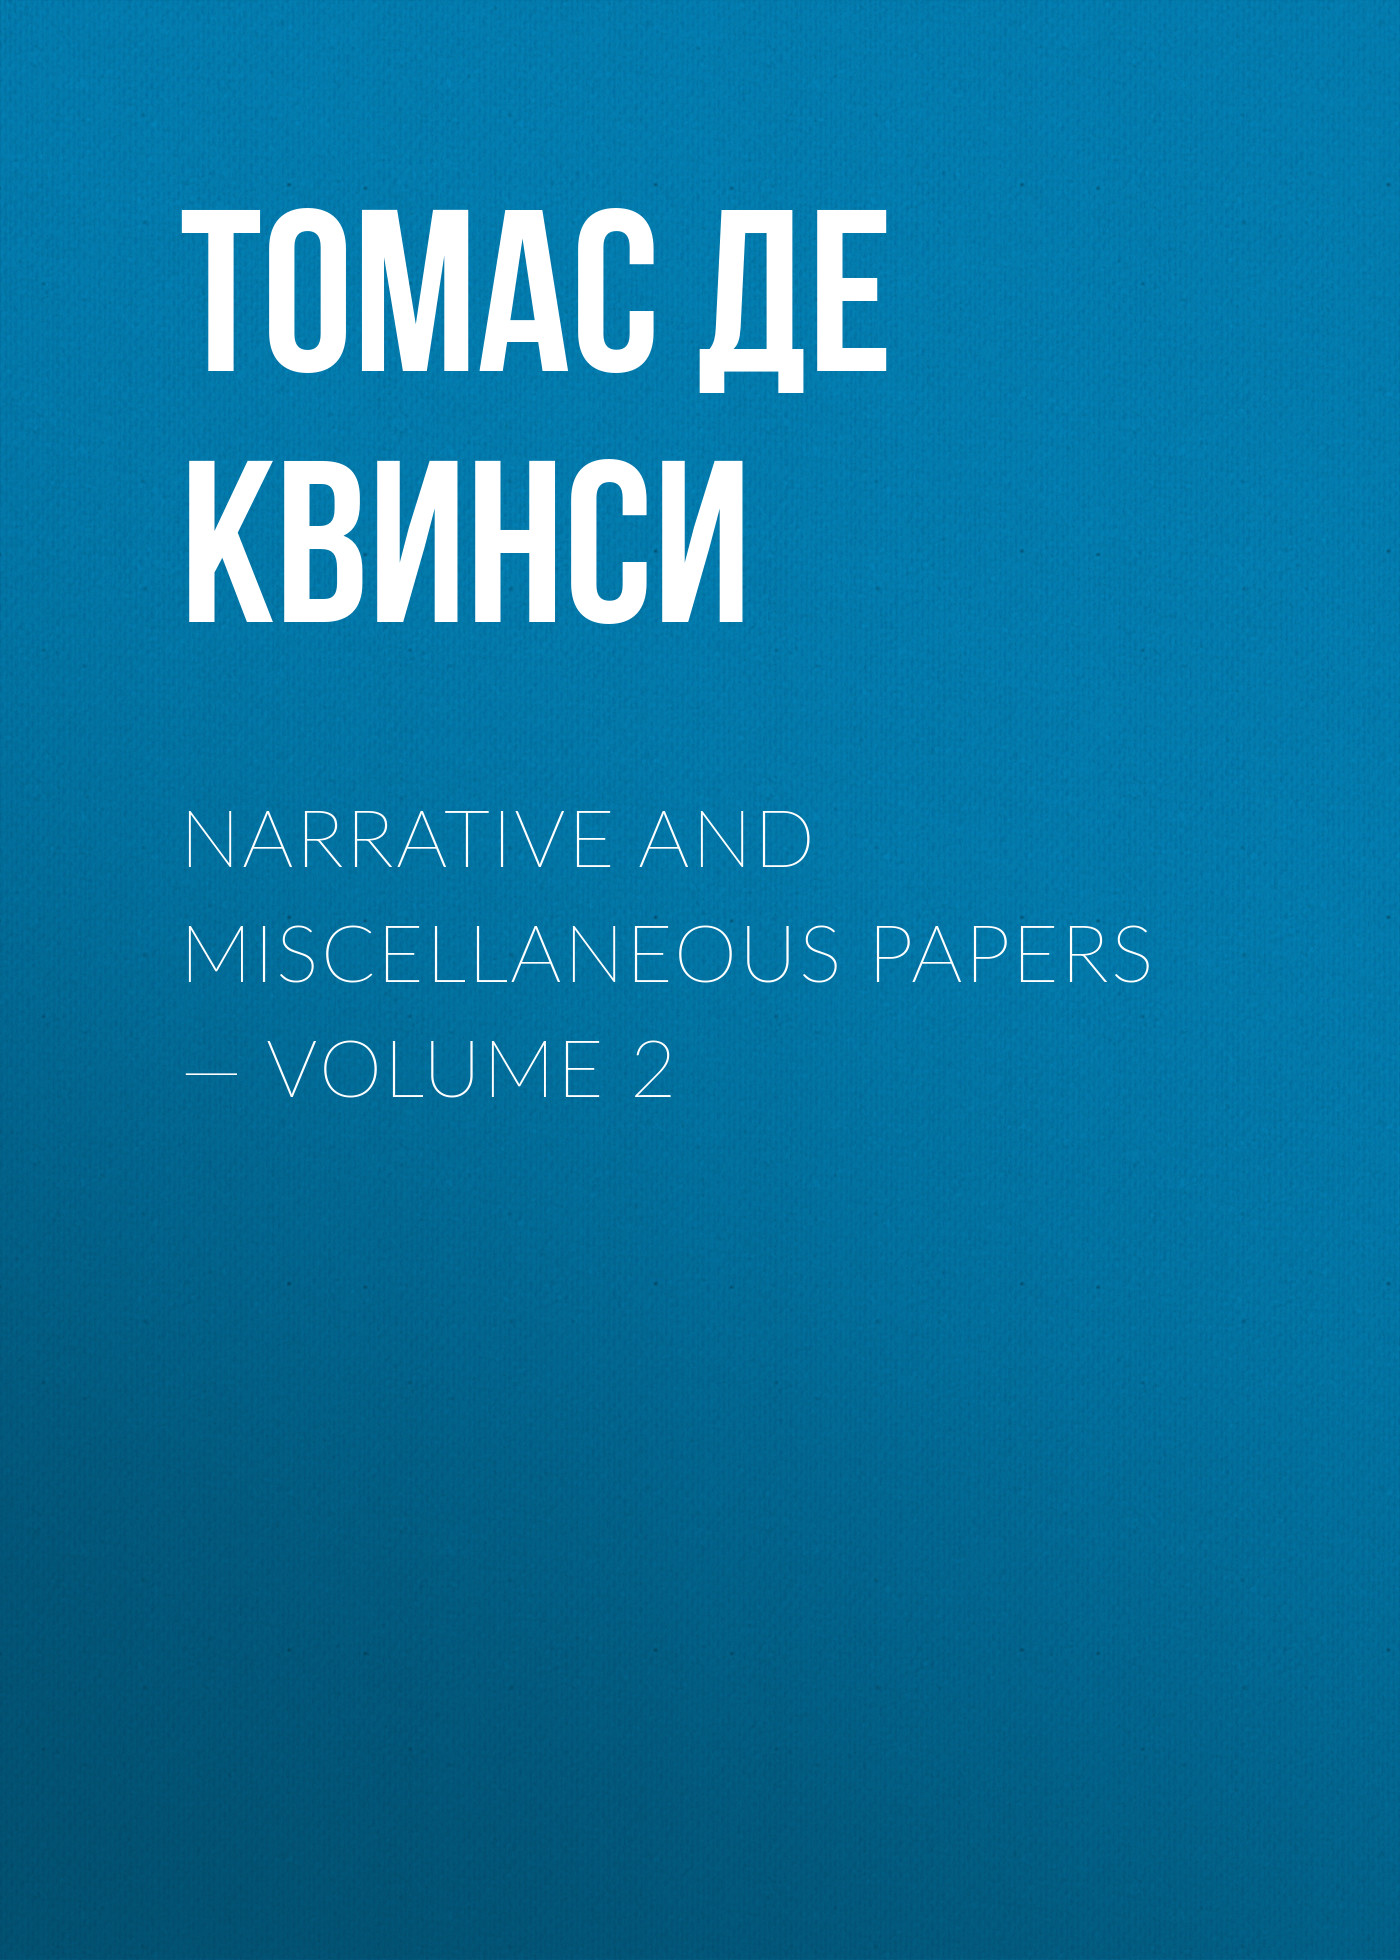 Narrative and Miscellaneous Papers— Volume 2